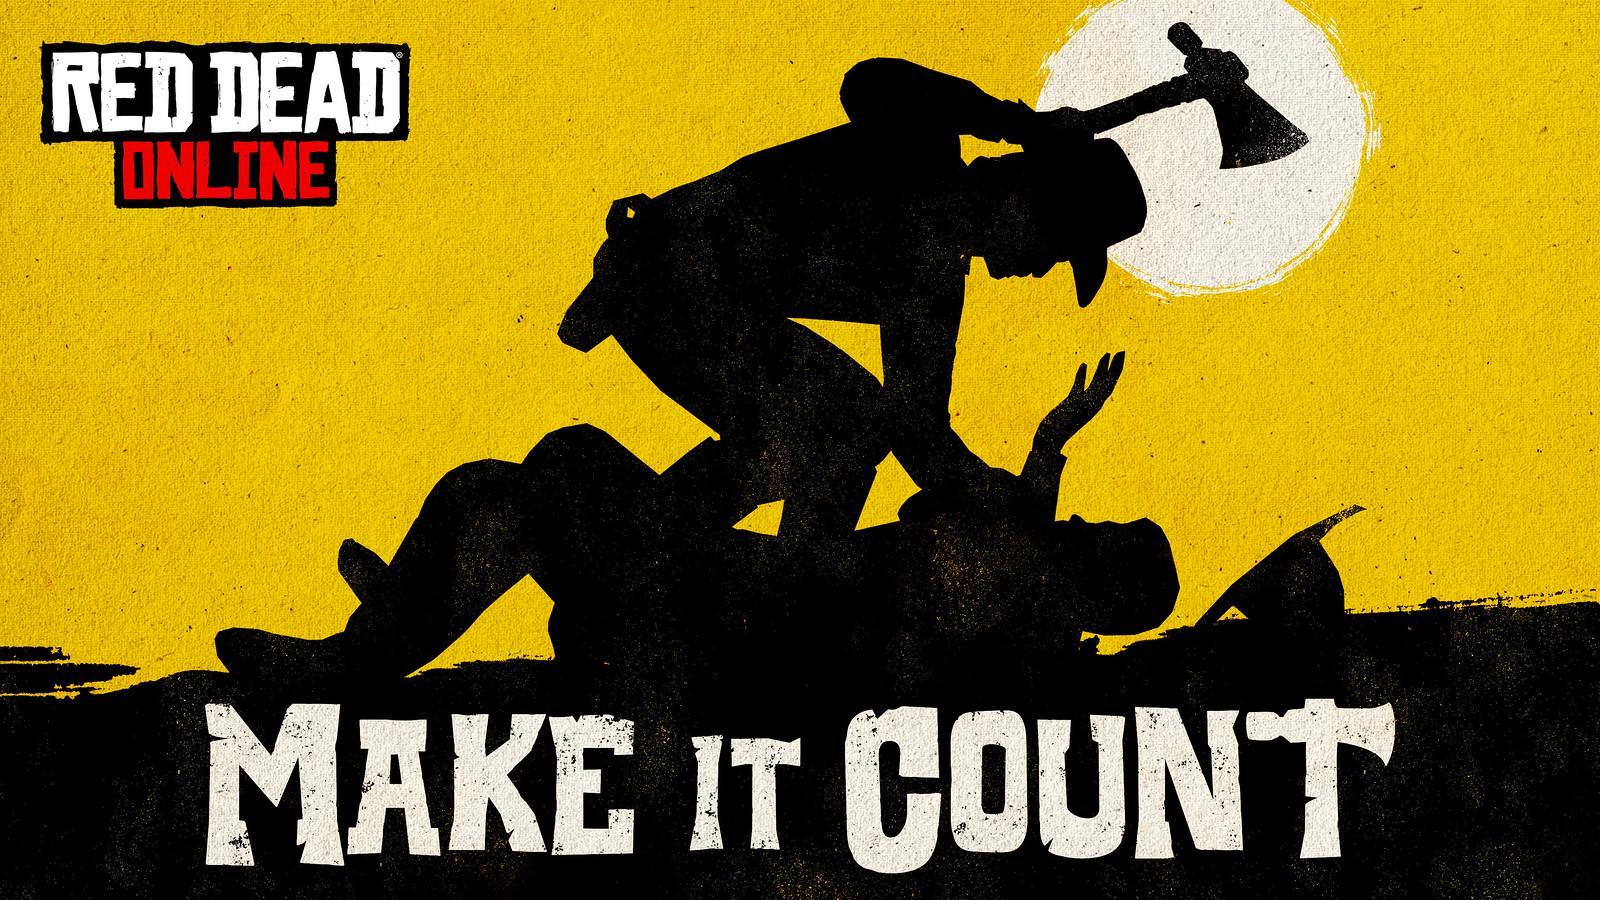 Make It Count - Ancient Tomahawk - Red Dead Online Mode